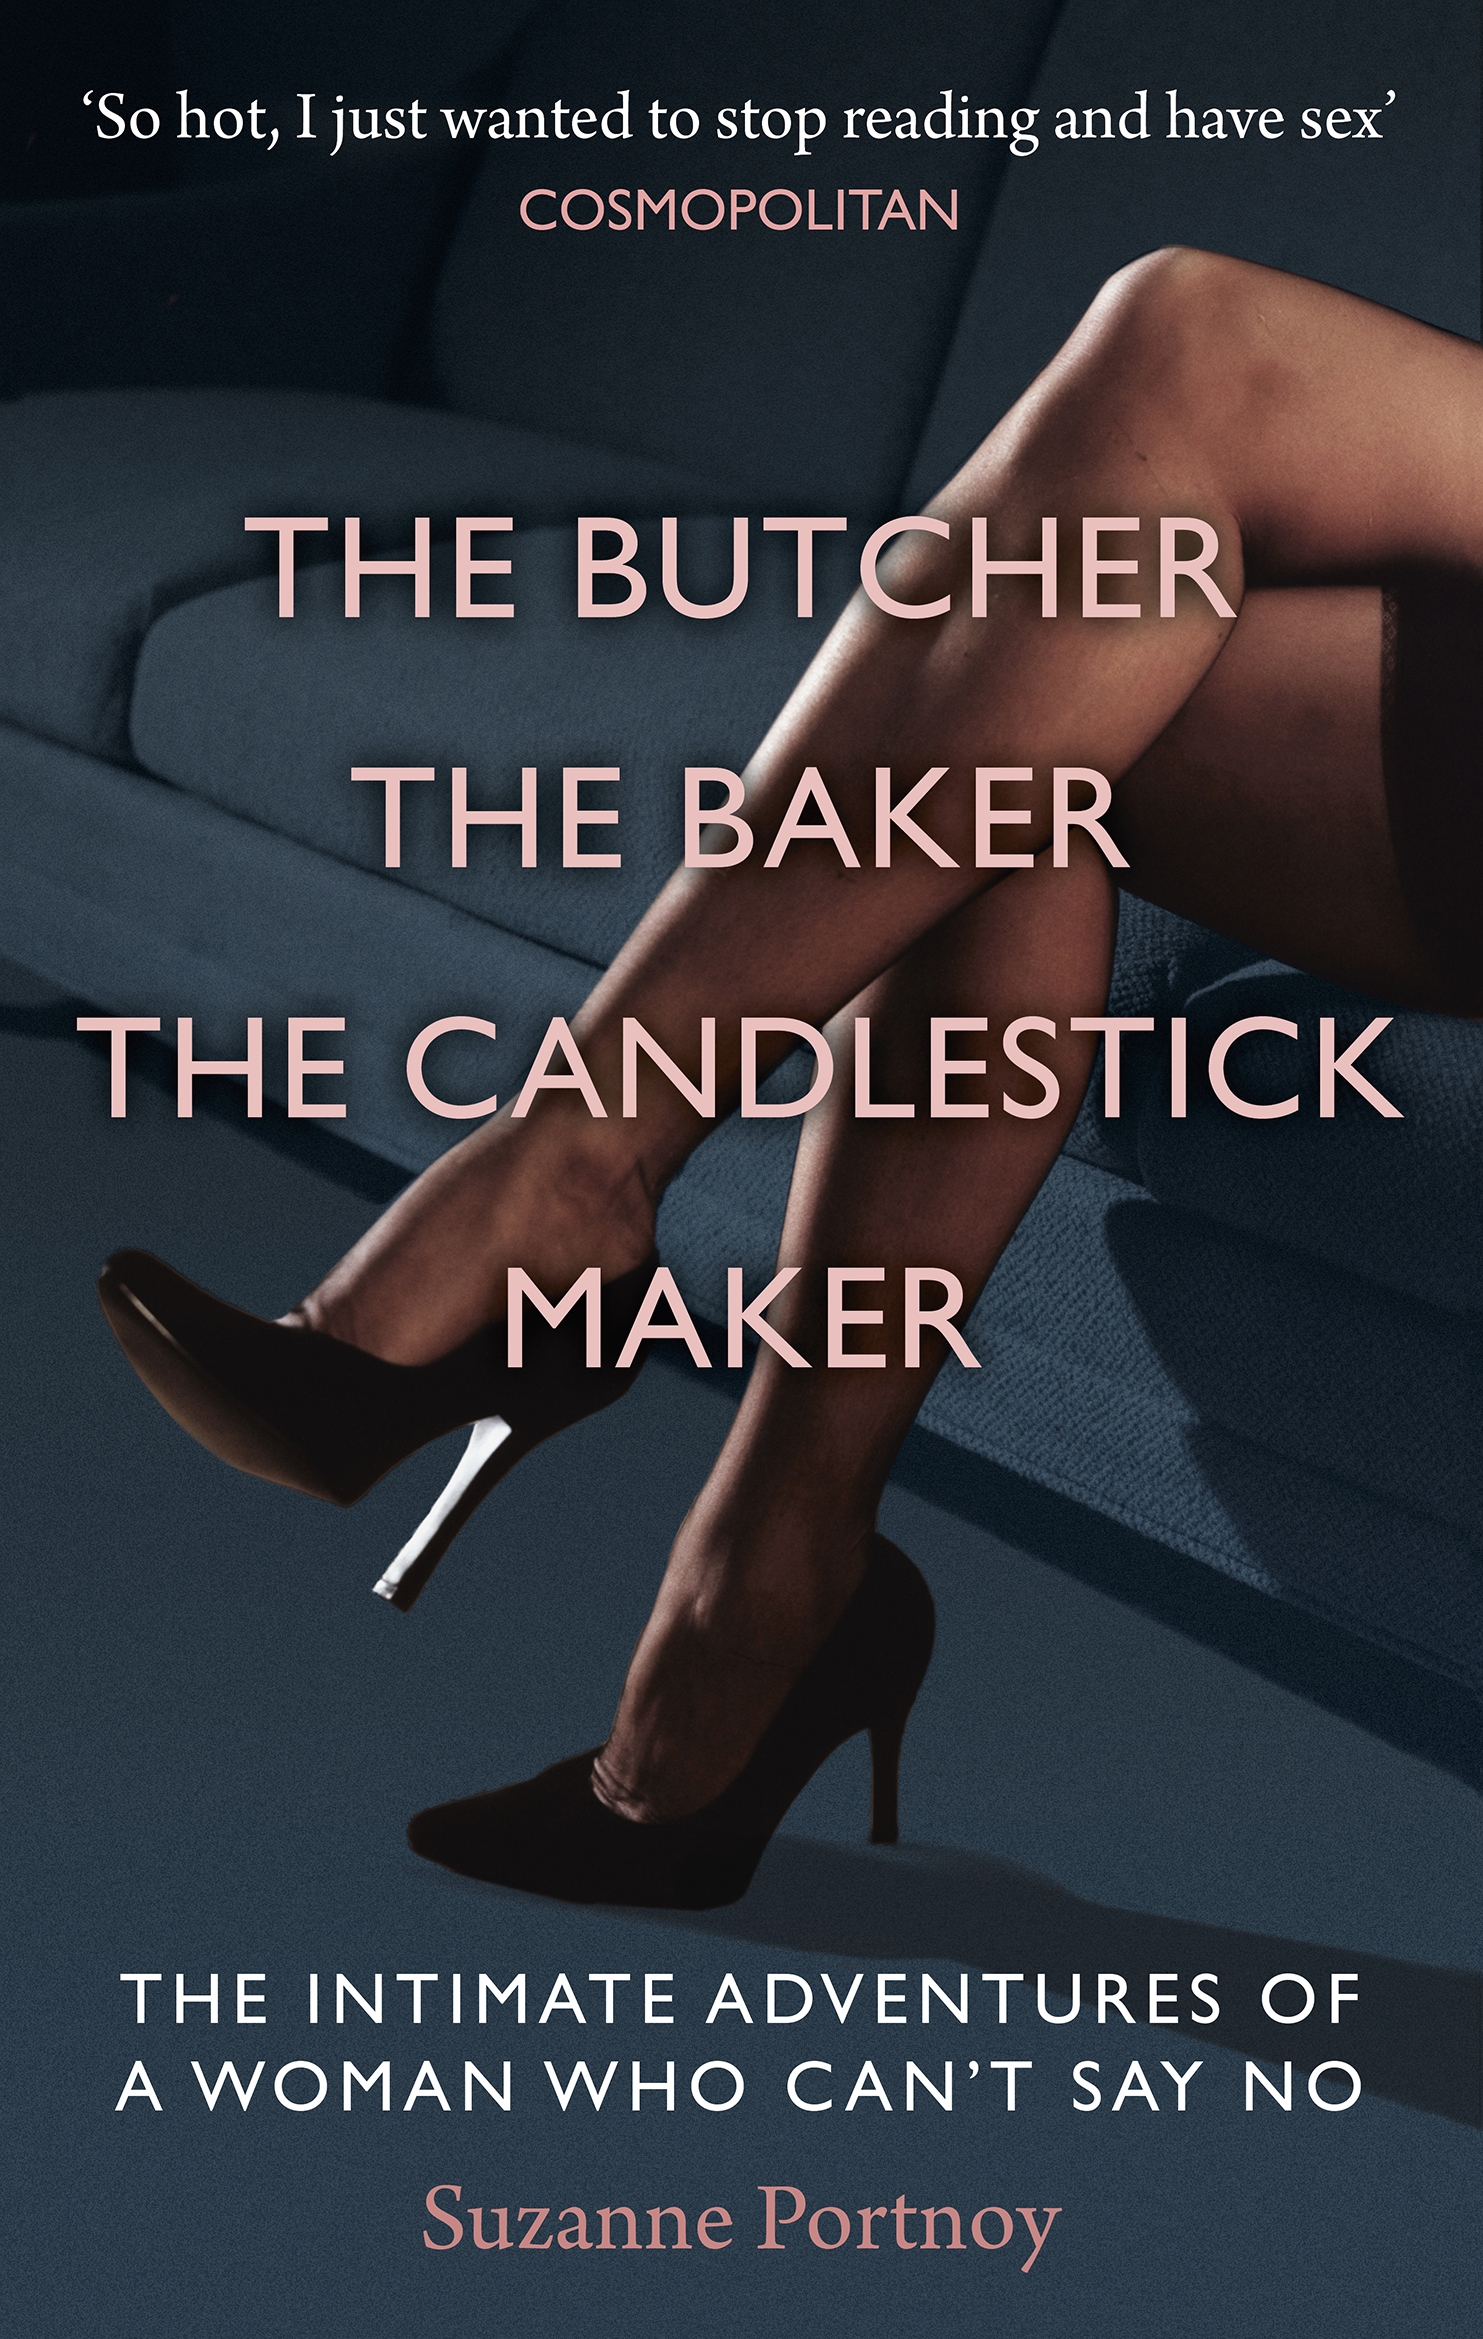 The Butcher, The Baker, The Candlestick Maker by Suzanne Portnoy